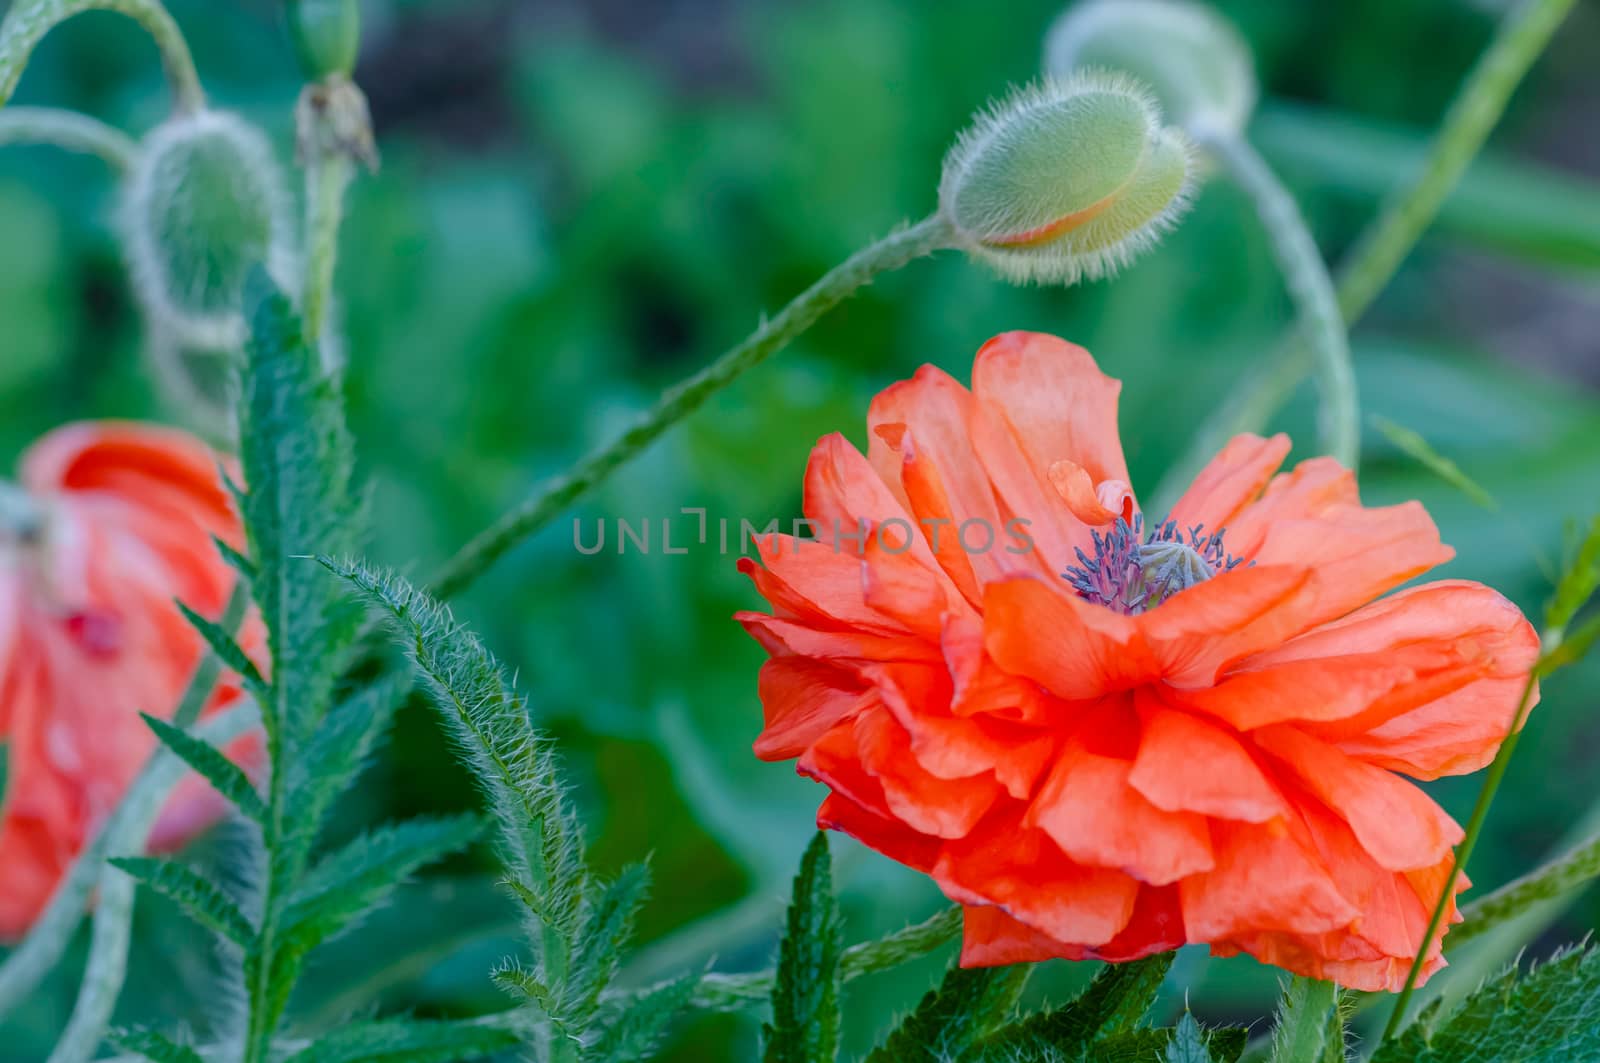 Poppy buds and flowers in bloom springtime vibrant colourful red and orange natural plant